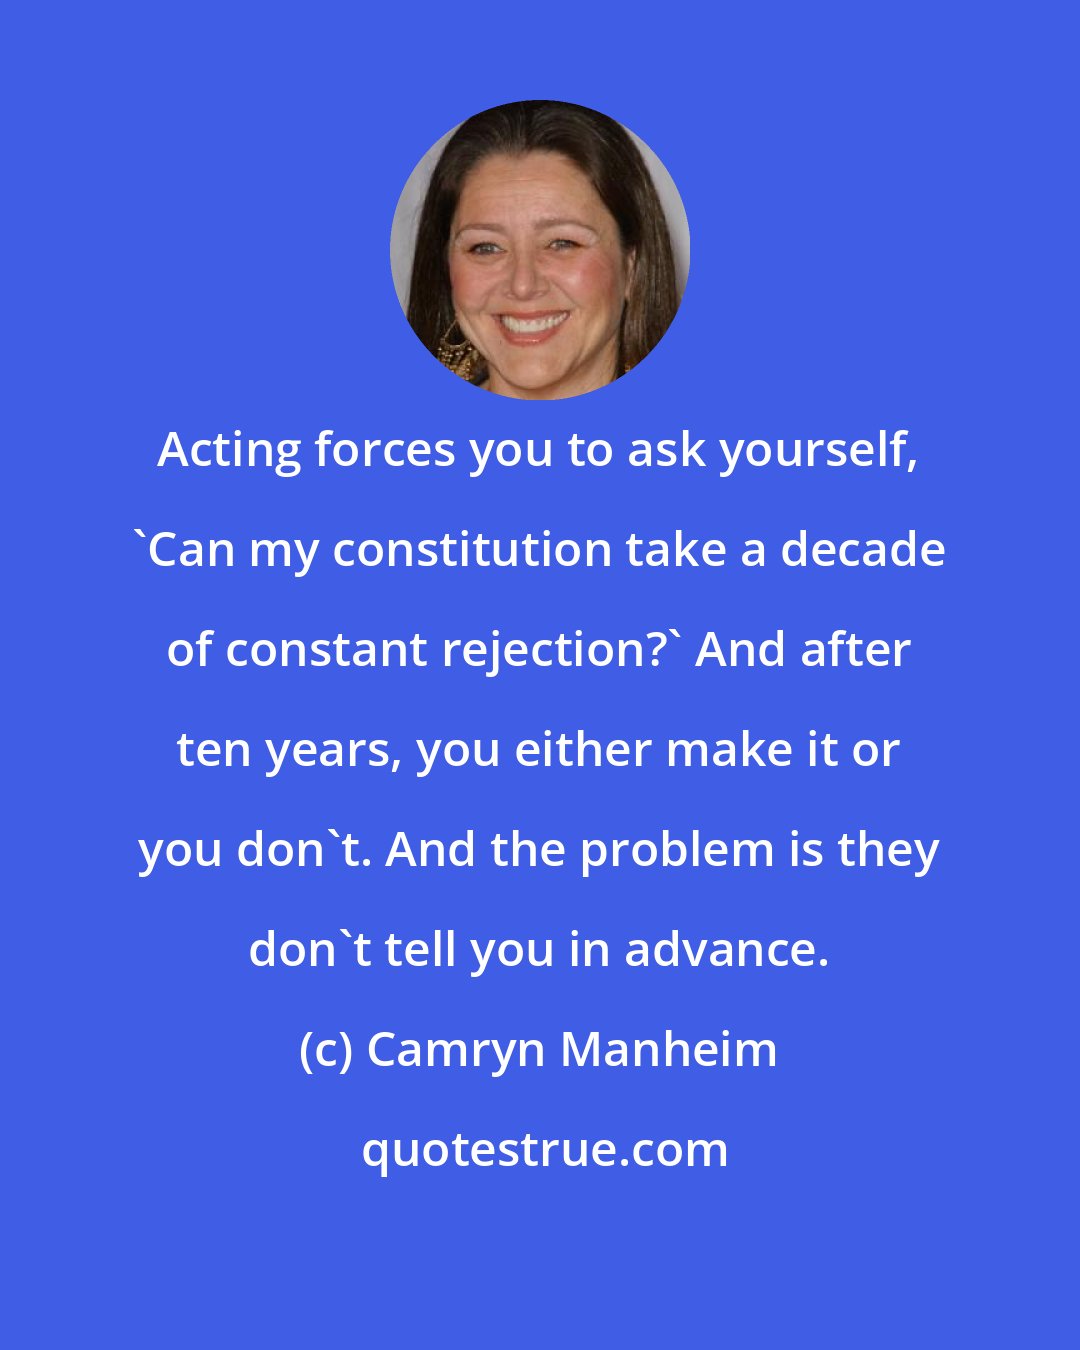 Camryn Manheim: Acting forces you to ask yourself, 'Can my constitution take a decade of constant rejection?' And after ten years, you either make it or you don't. And the problem is they don't tell you in advance.